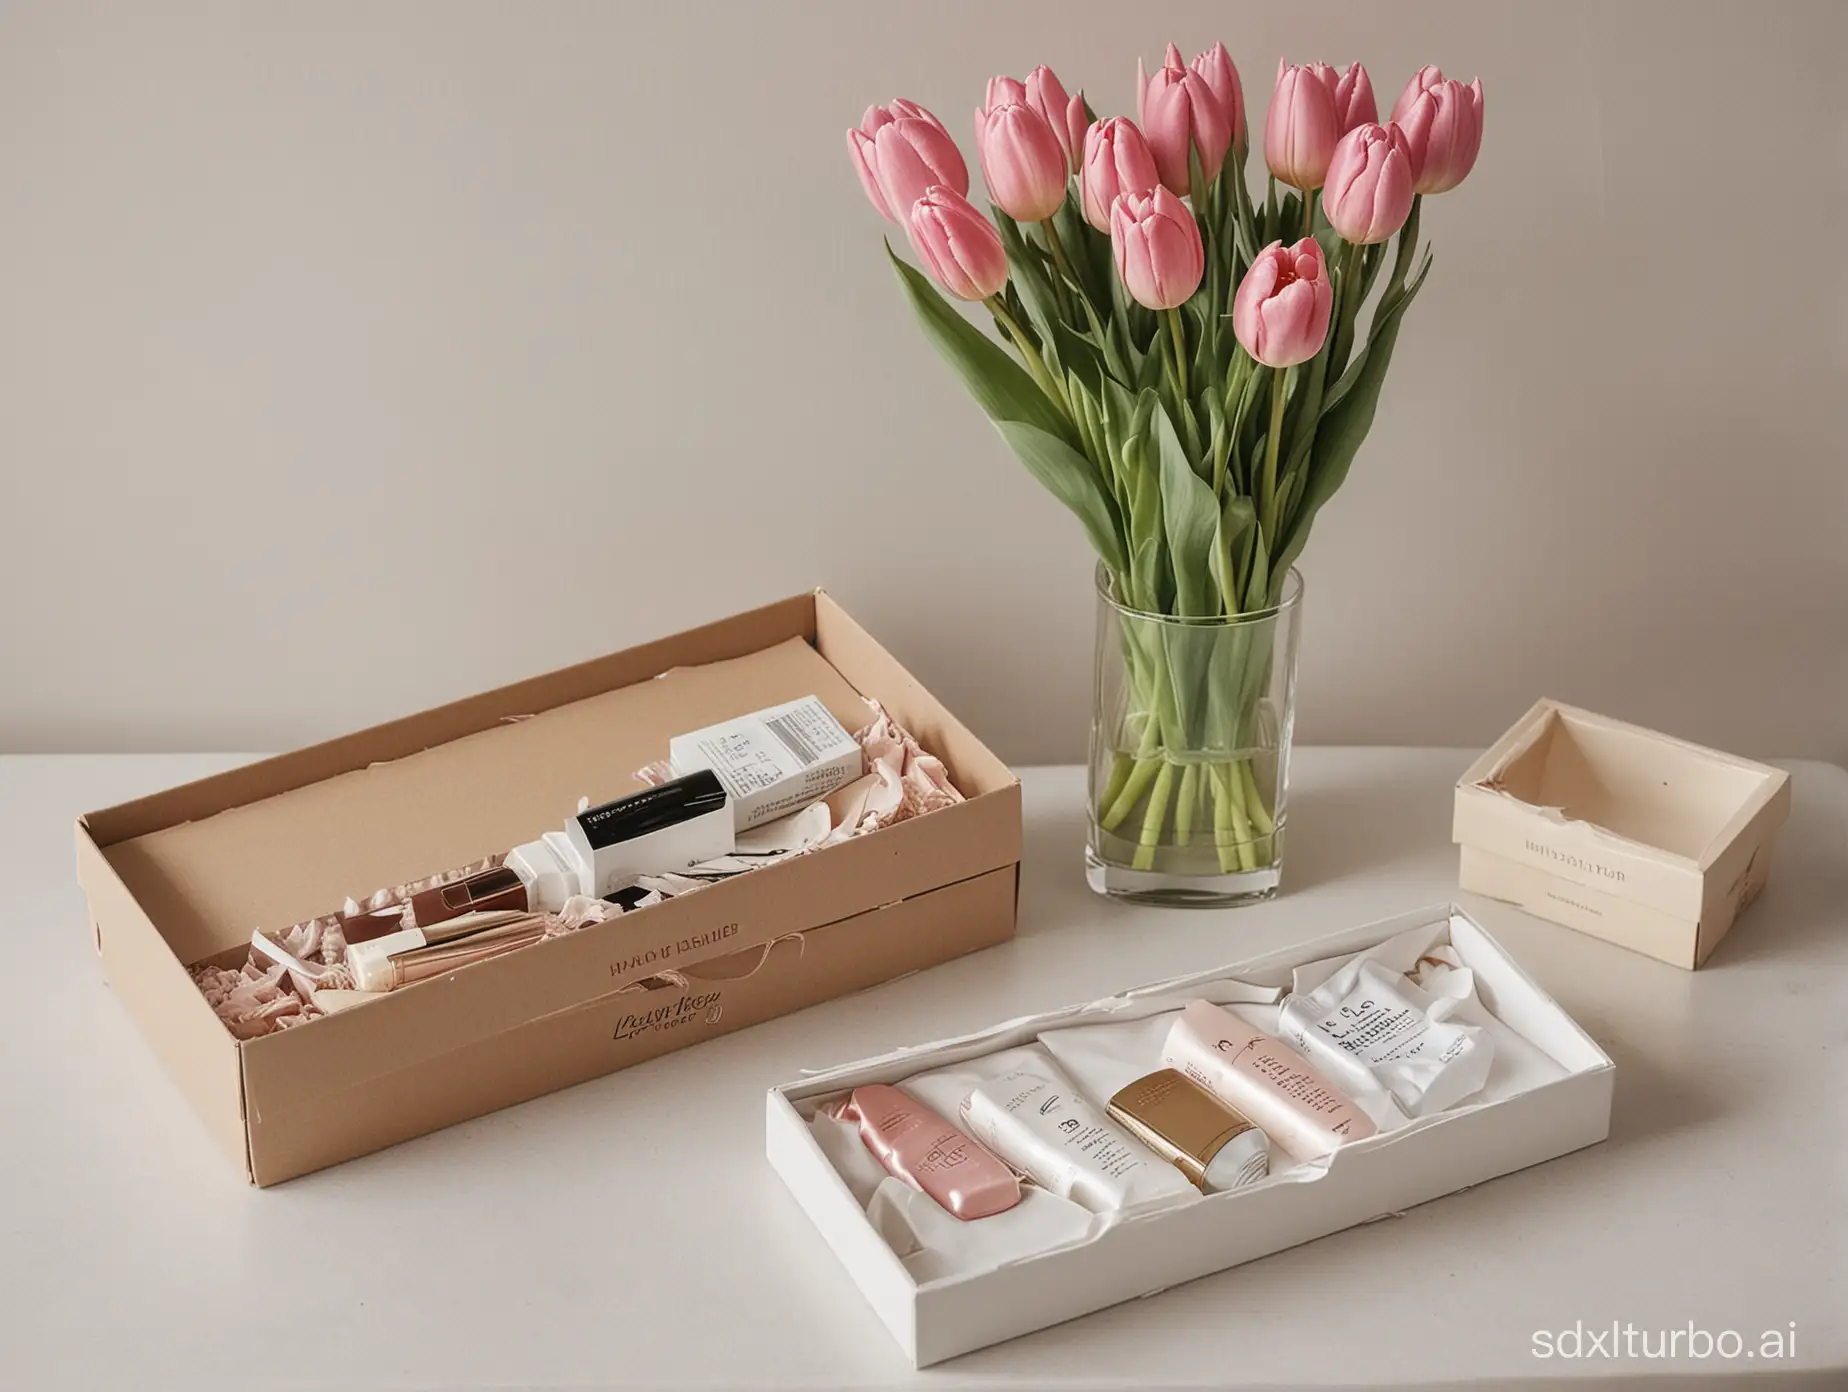 Rectangular dressing table top, with a tulip bouquet on the left, everyday cosmetics on the right, and an unopened Mother's Day gift box.